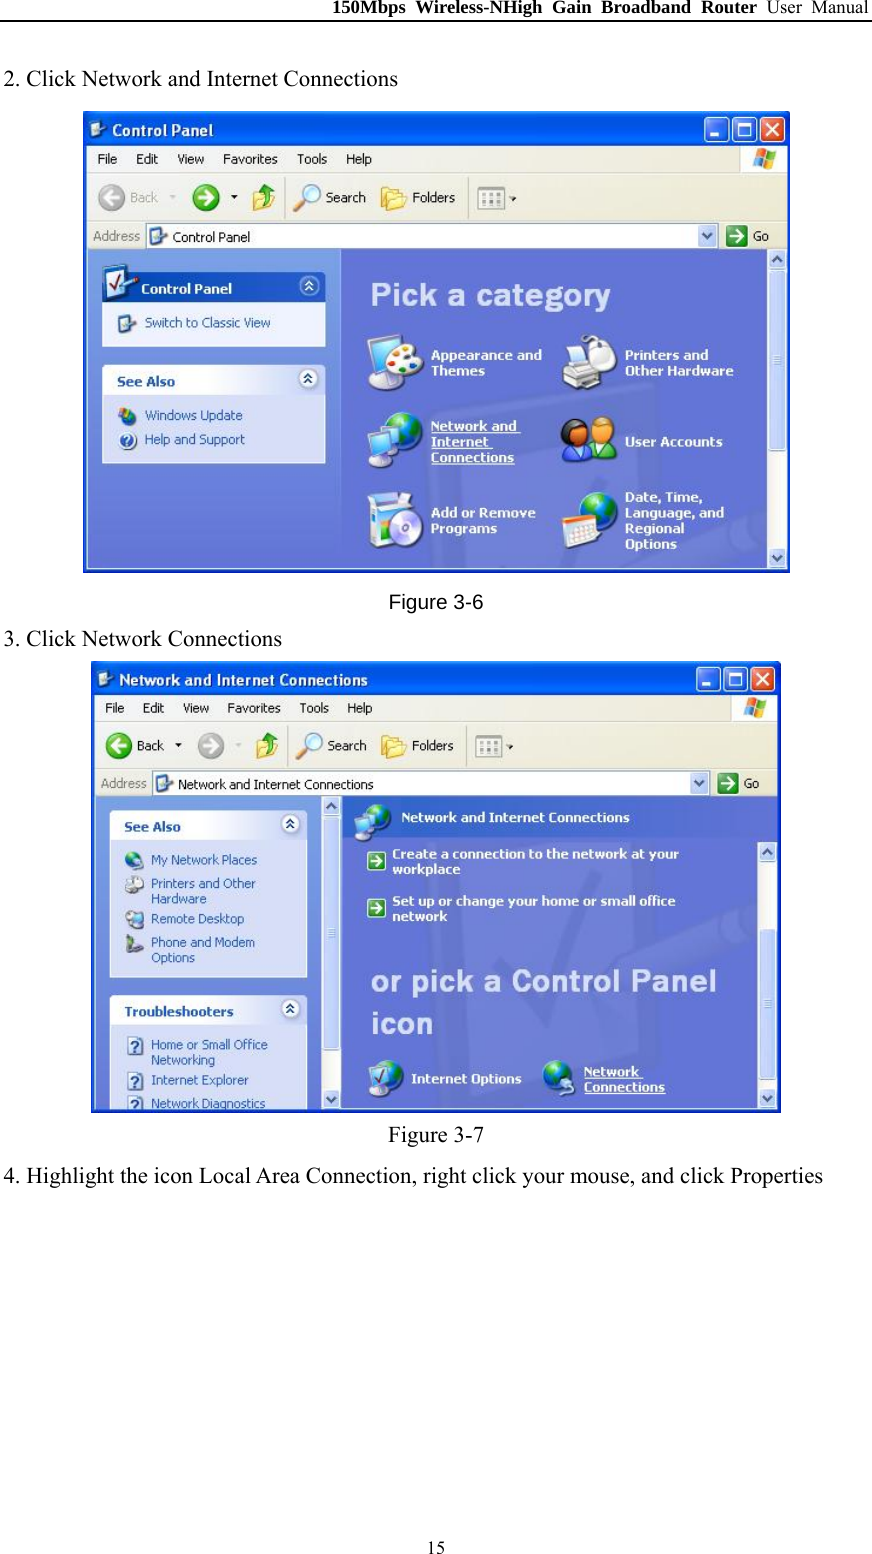 150Mbps Wireless-NHigh Gain Broadband Router User Manual 2. Click Network and Internet Connections  Figure 3-6 3. Click Network Connections  Figure 3-7 4. Highlight the icon Local Area Connection, right click your mouse, and click Properties  15